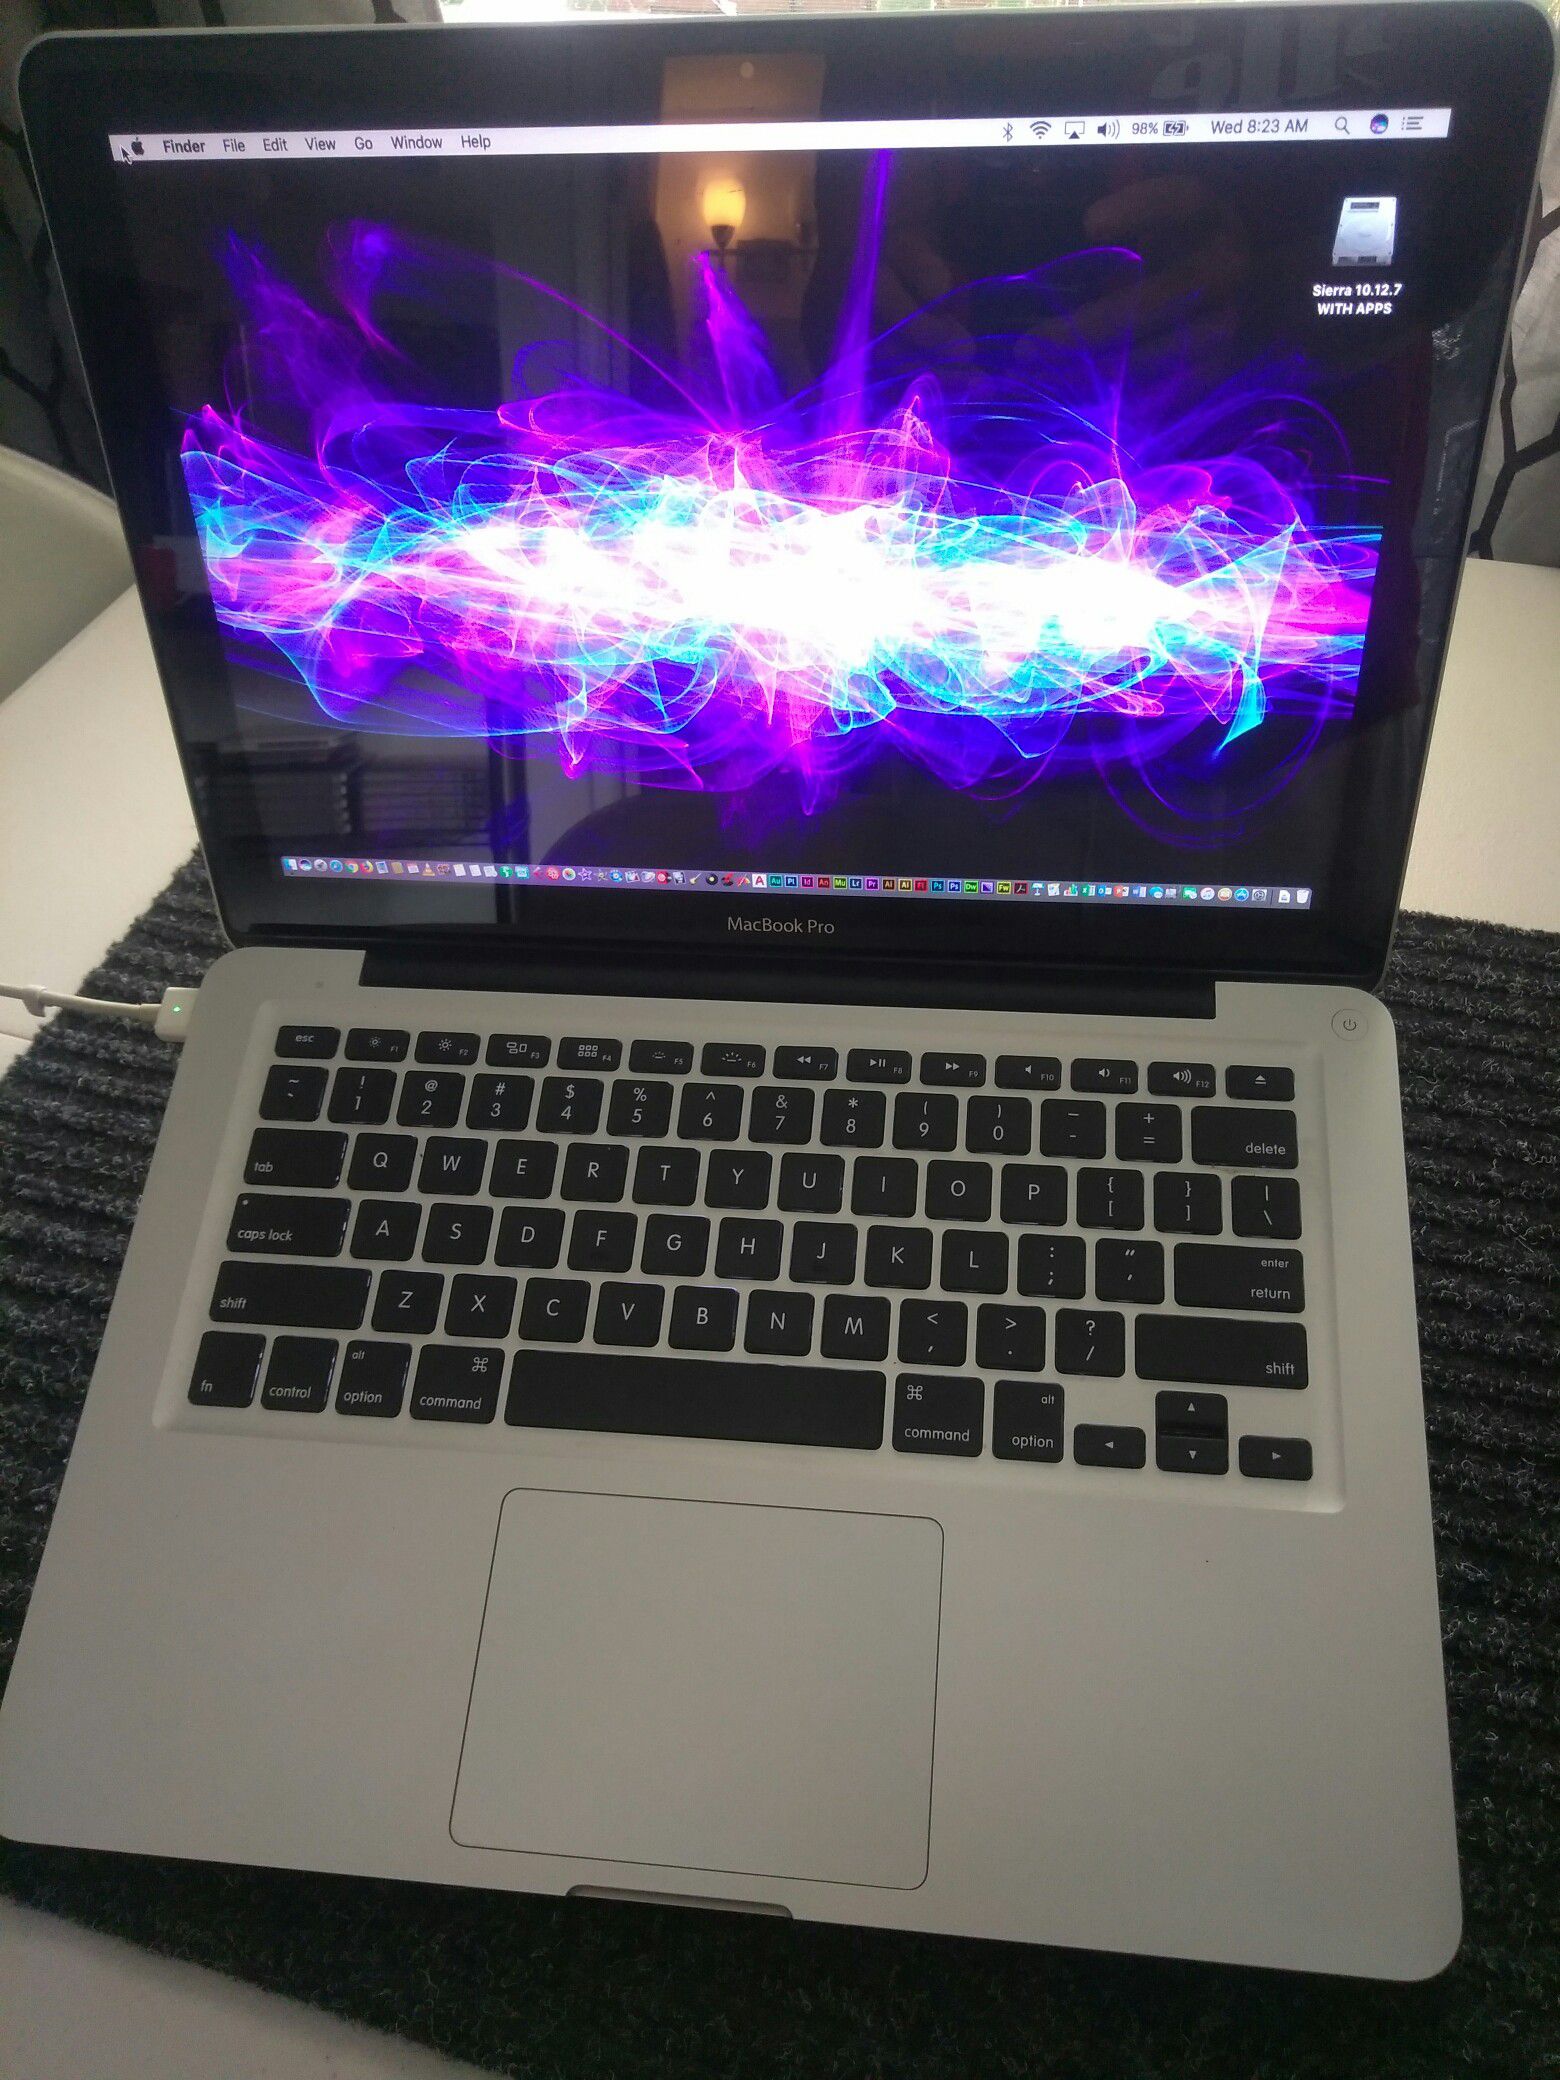 Awesome Apple MacBook Pro 13" - i-Core 7 Quad 2.9Ghz, New 4hr battery and new charger, tons of applications